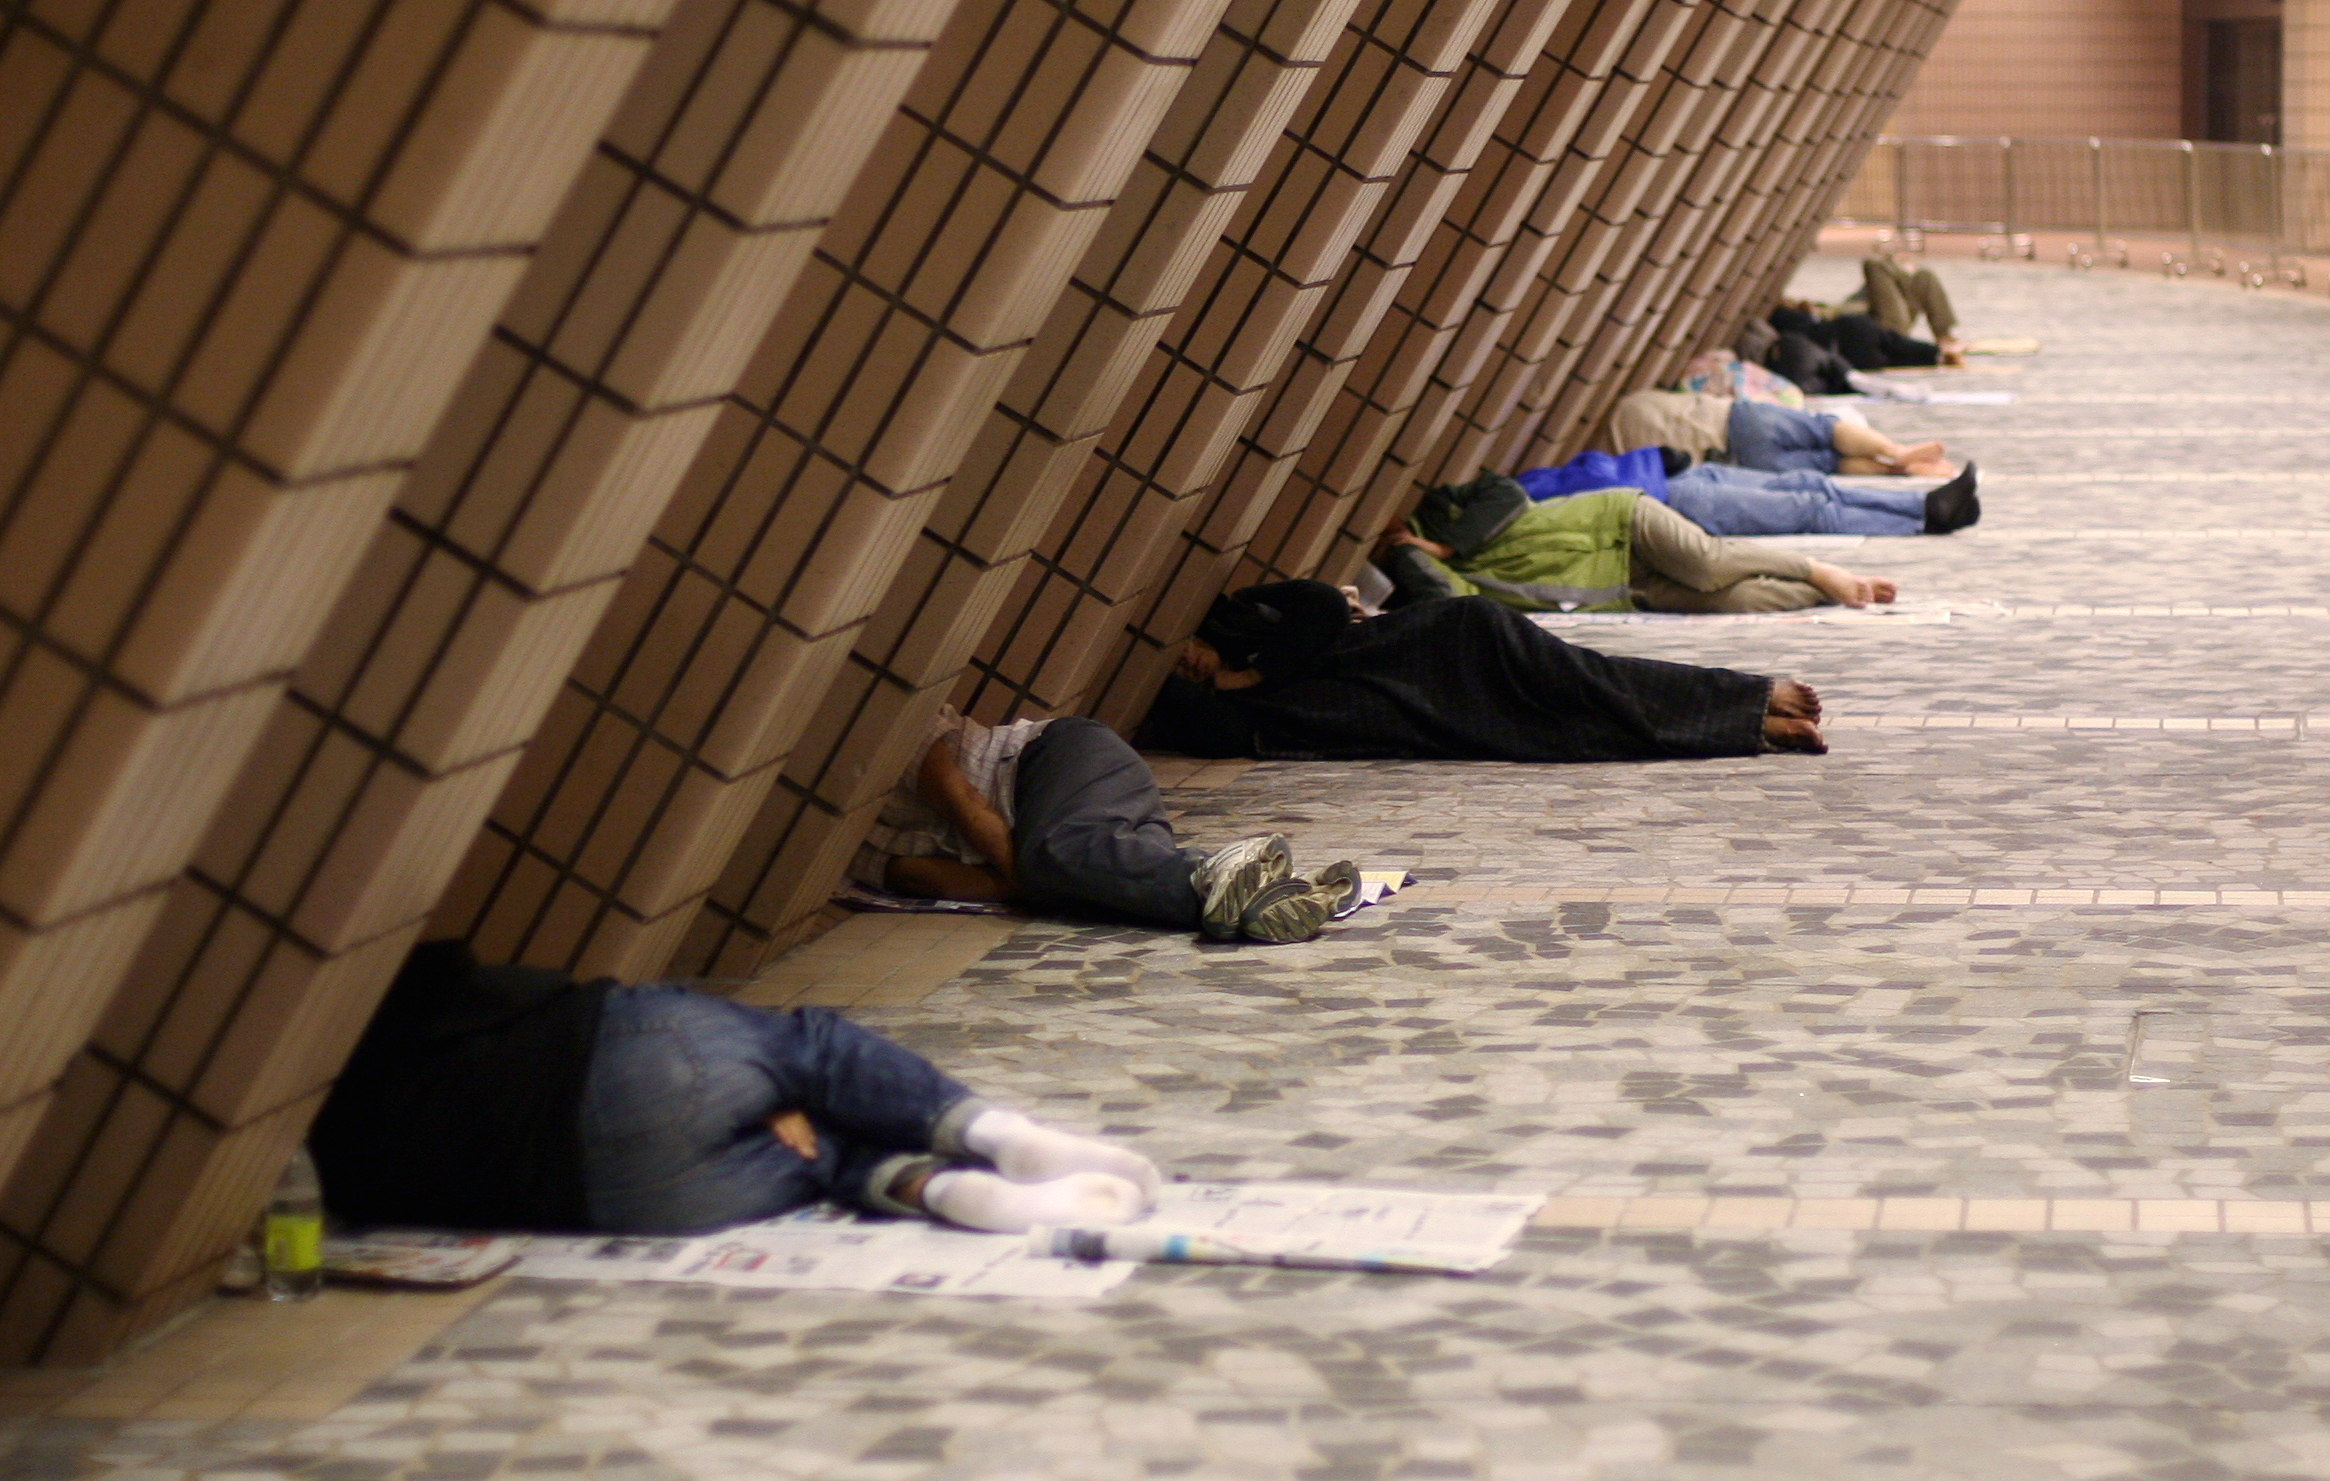 Street sleepers under the walls of the Hong Kong Cultural Centre in Tsim Sha Tsui.